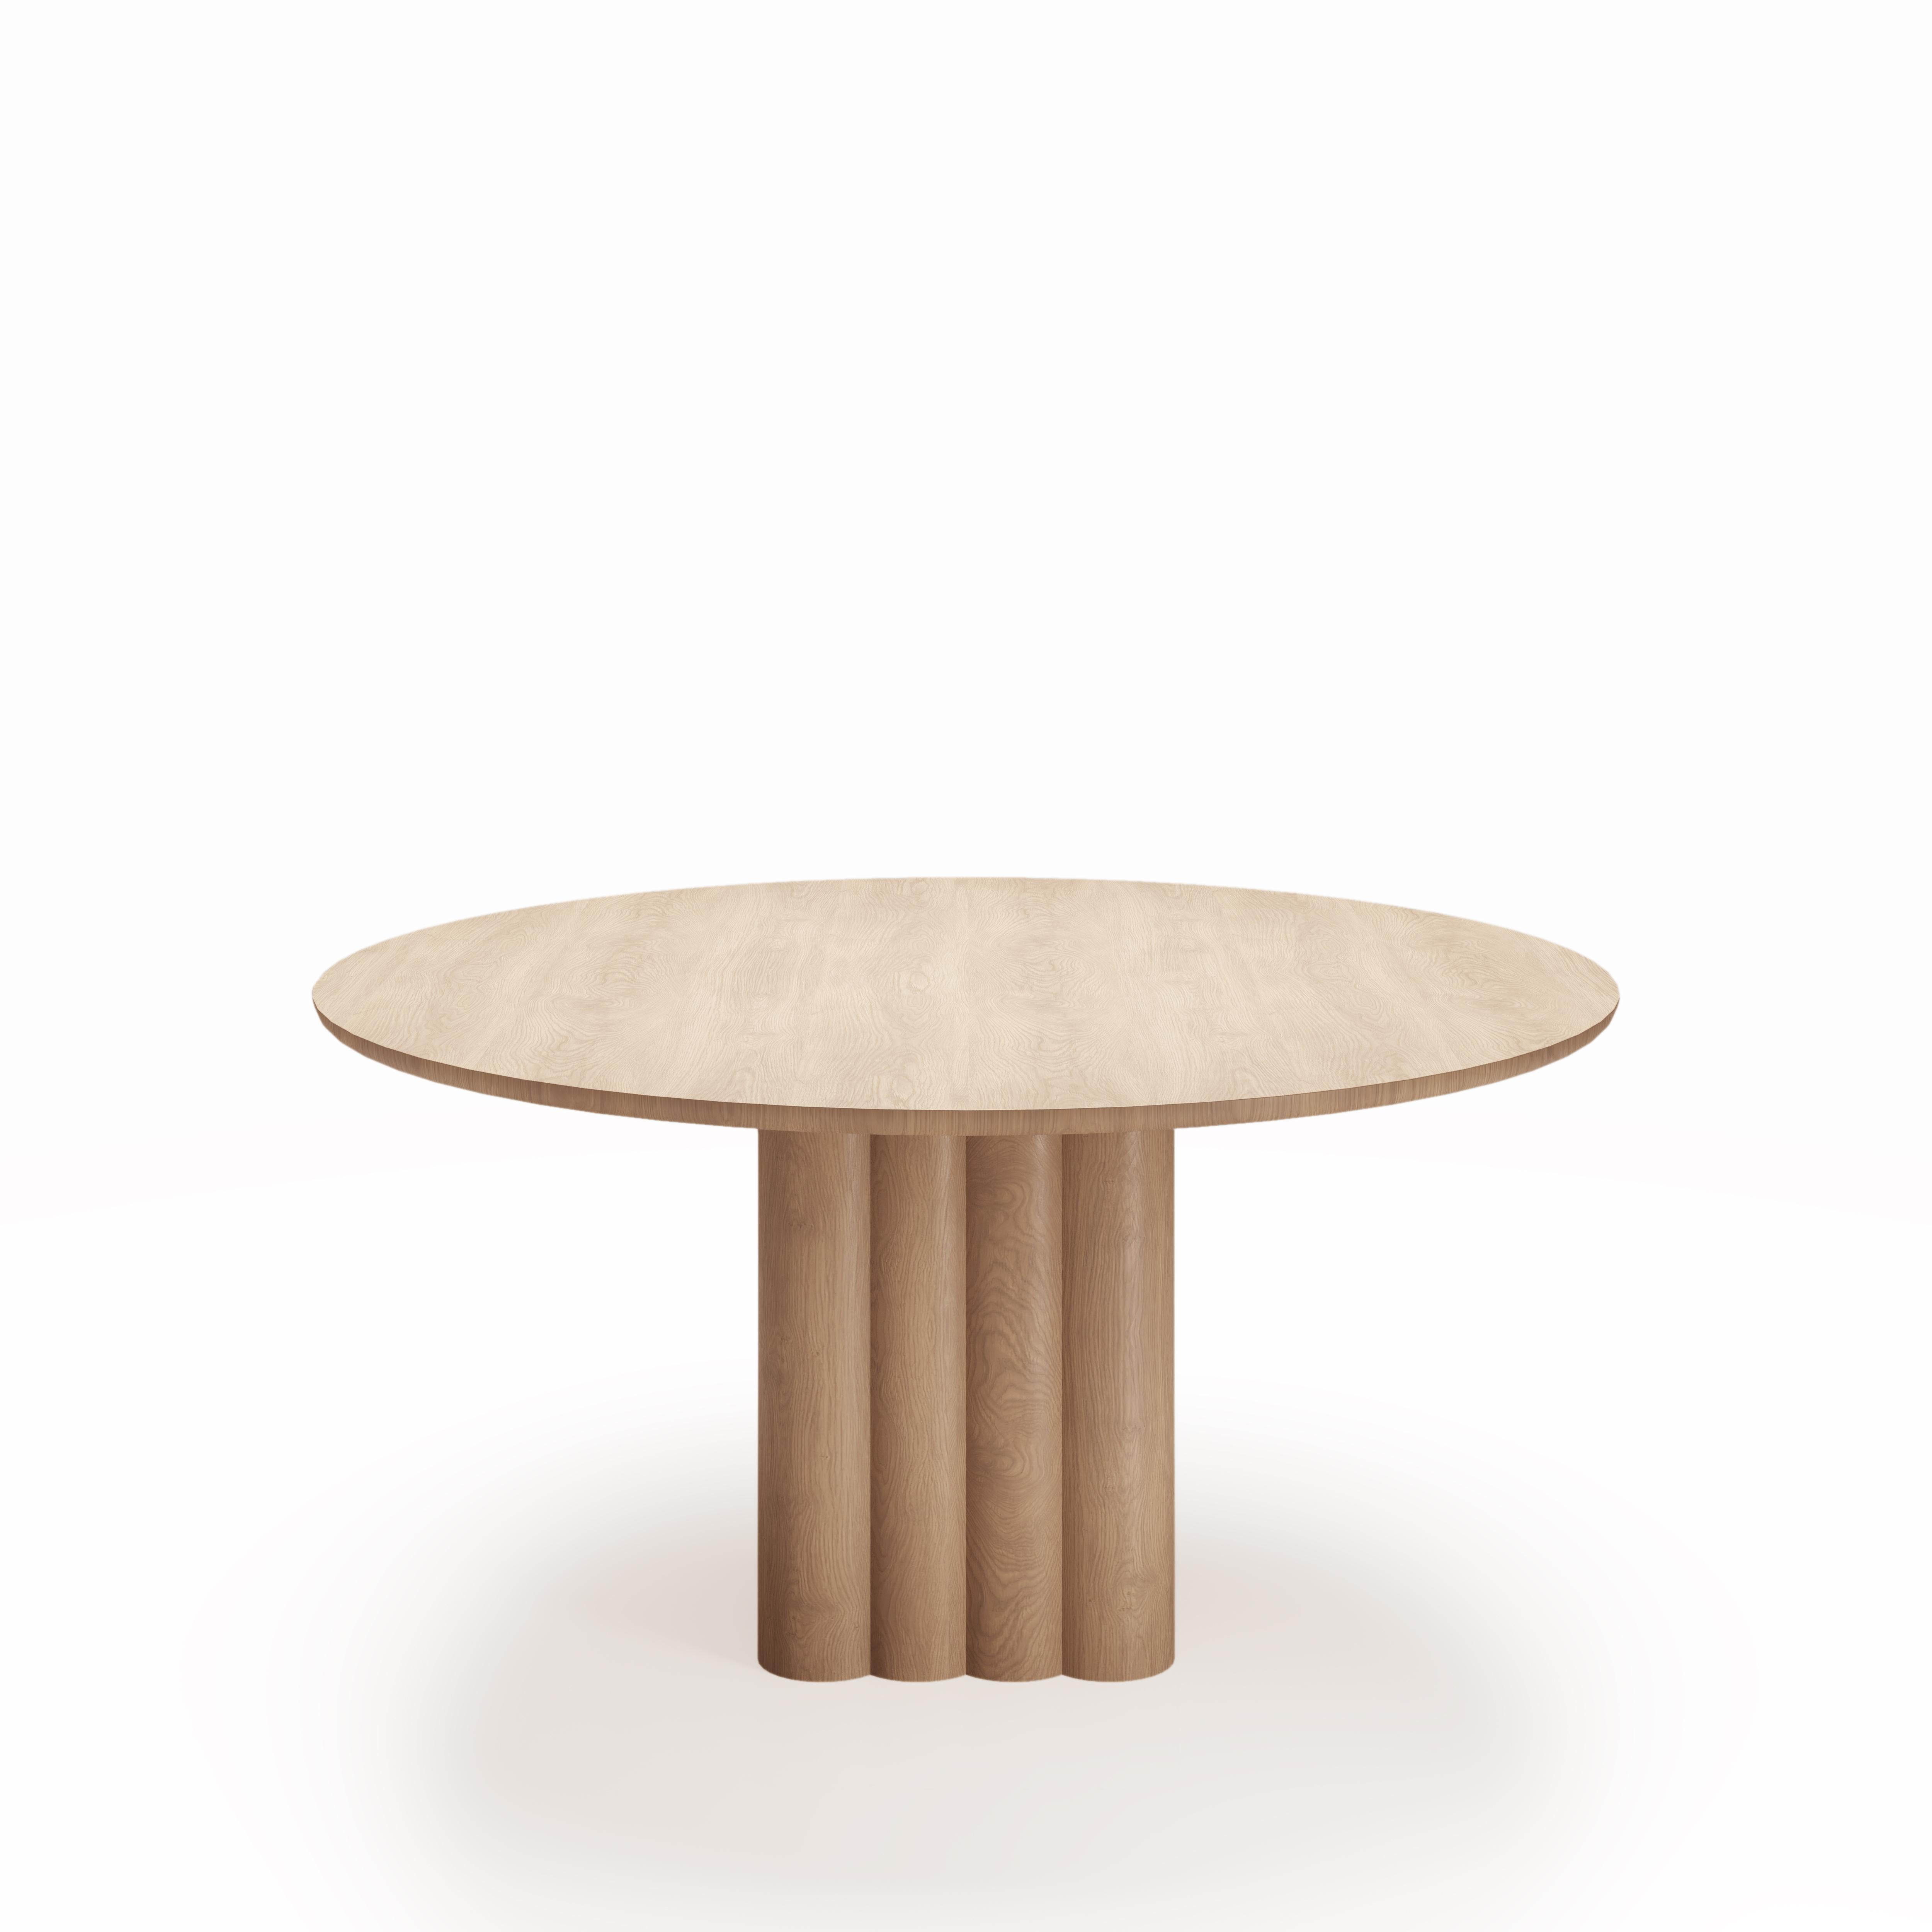 Round Dining Table 'Plush' by Dk3, Smoked Oak or Walnut, 160 cm For Sale 3